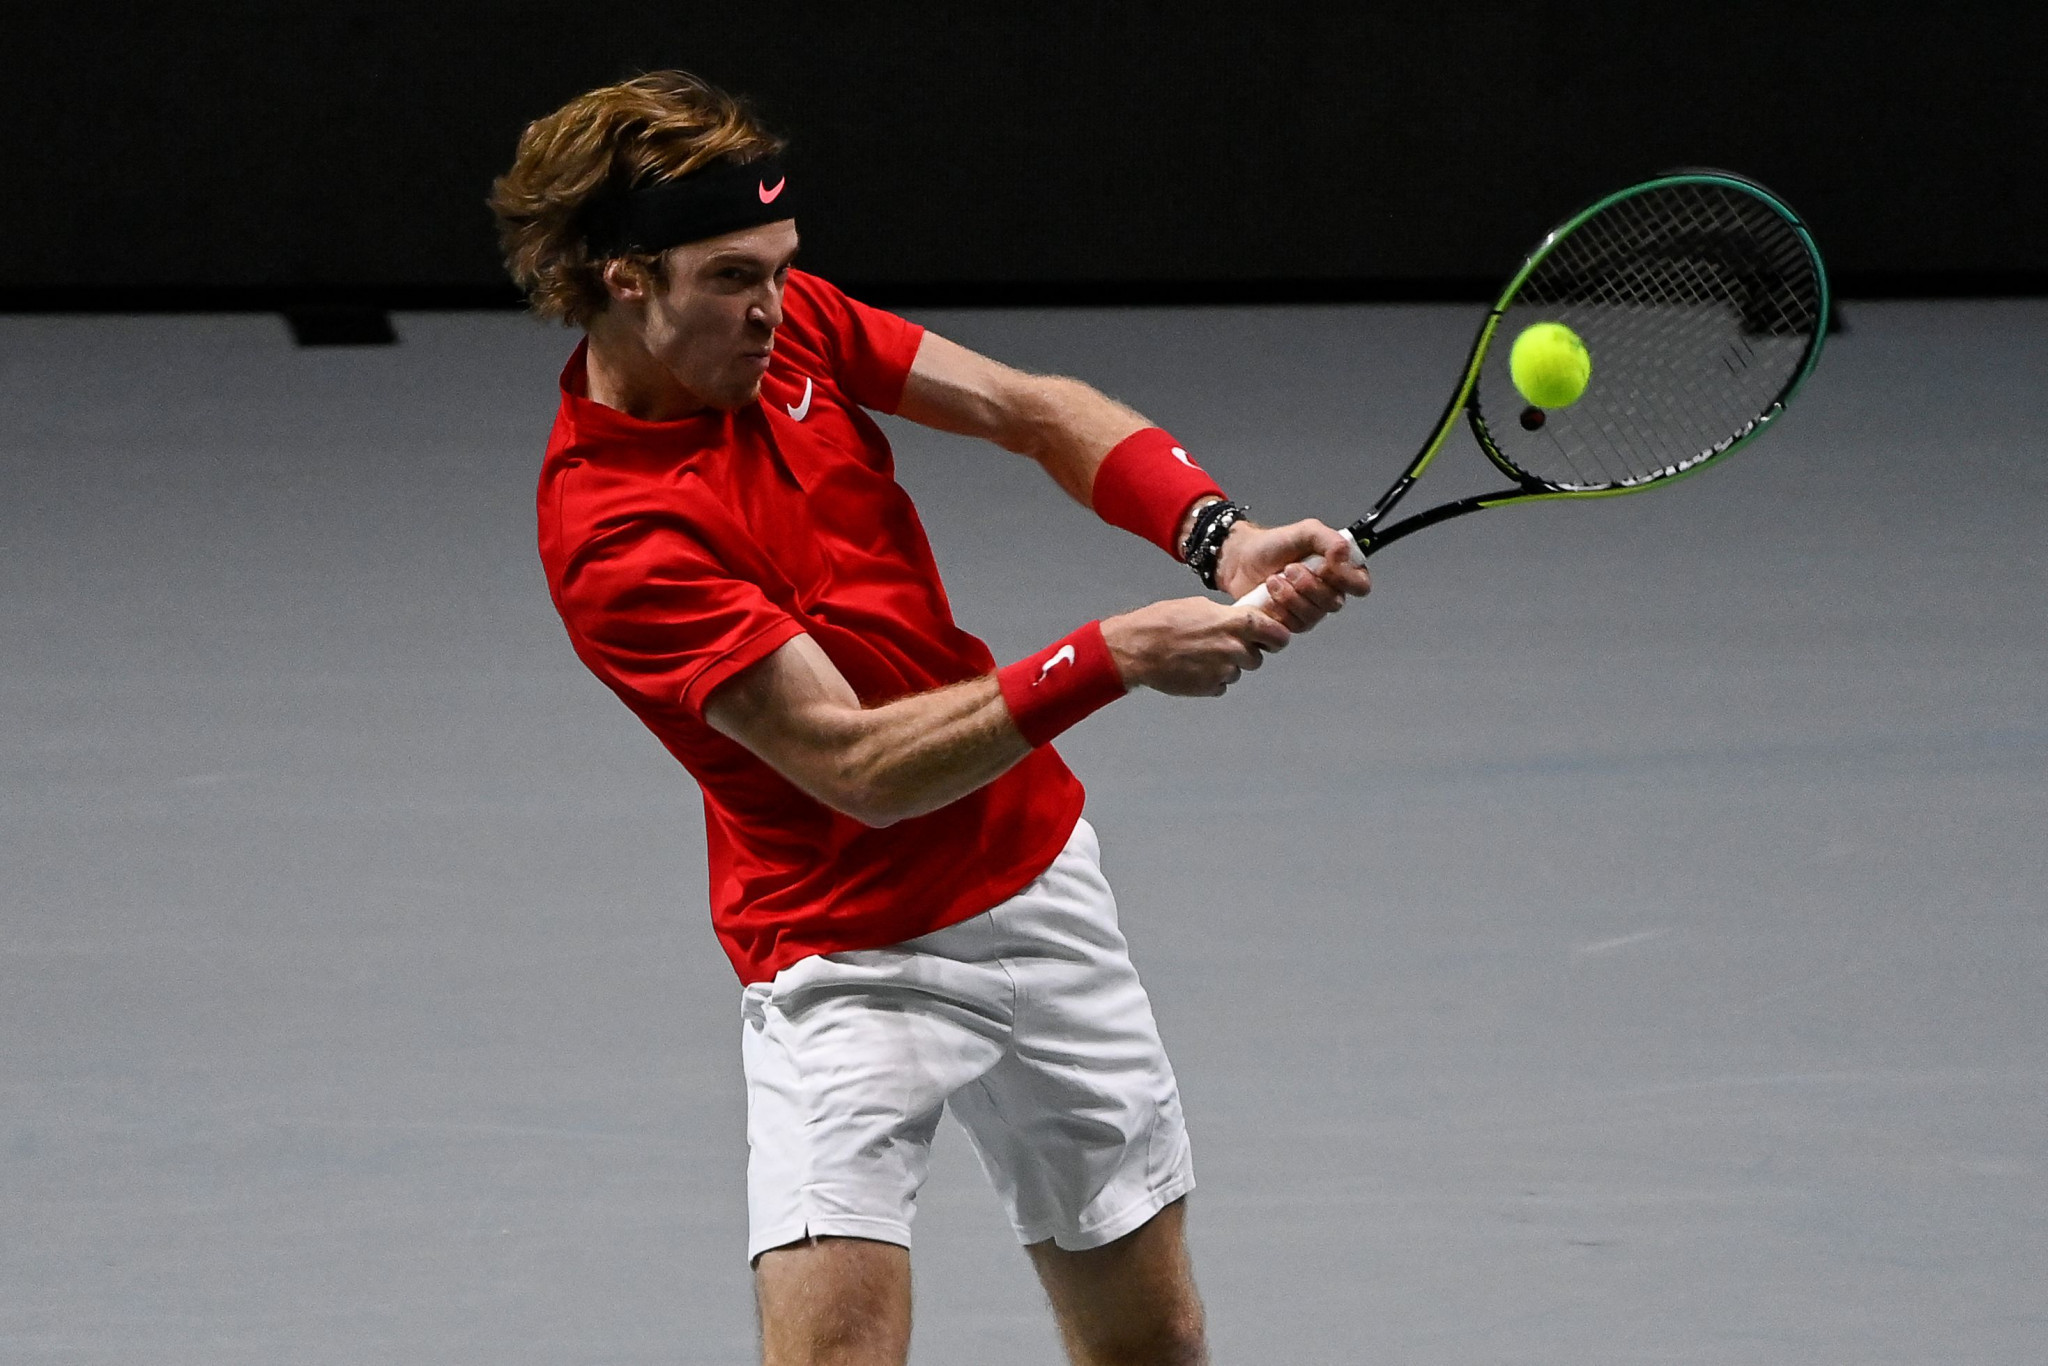 Andrey Rublev eased past Dominik Koepfer in the opening singles match ©Getty Images